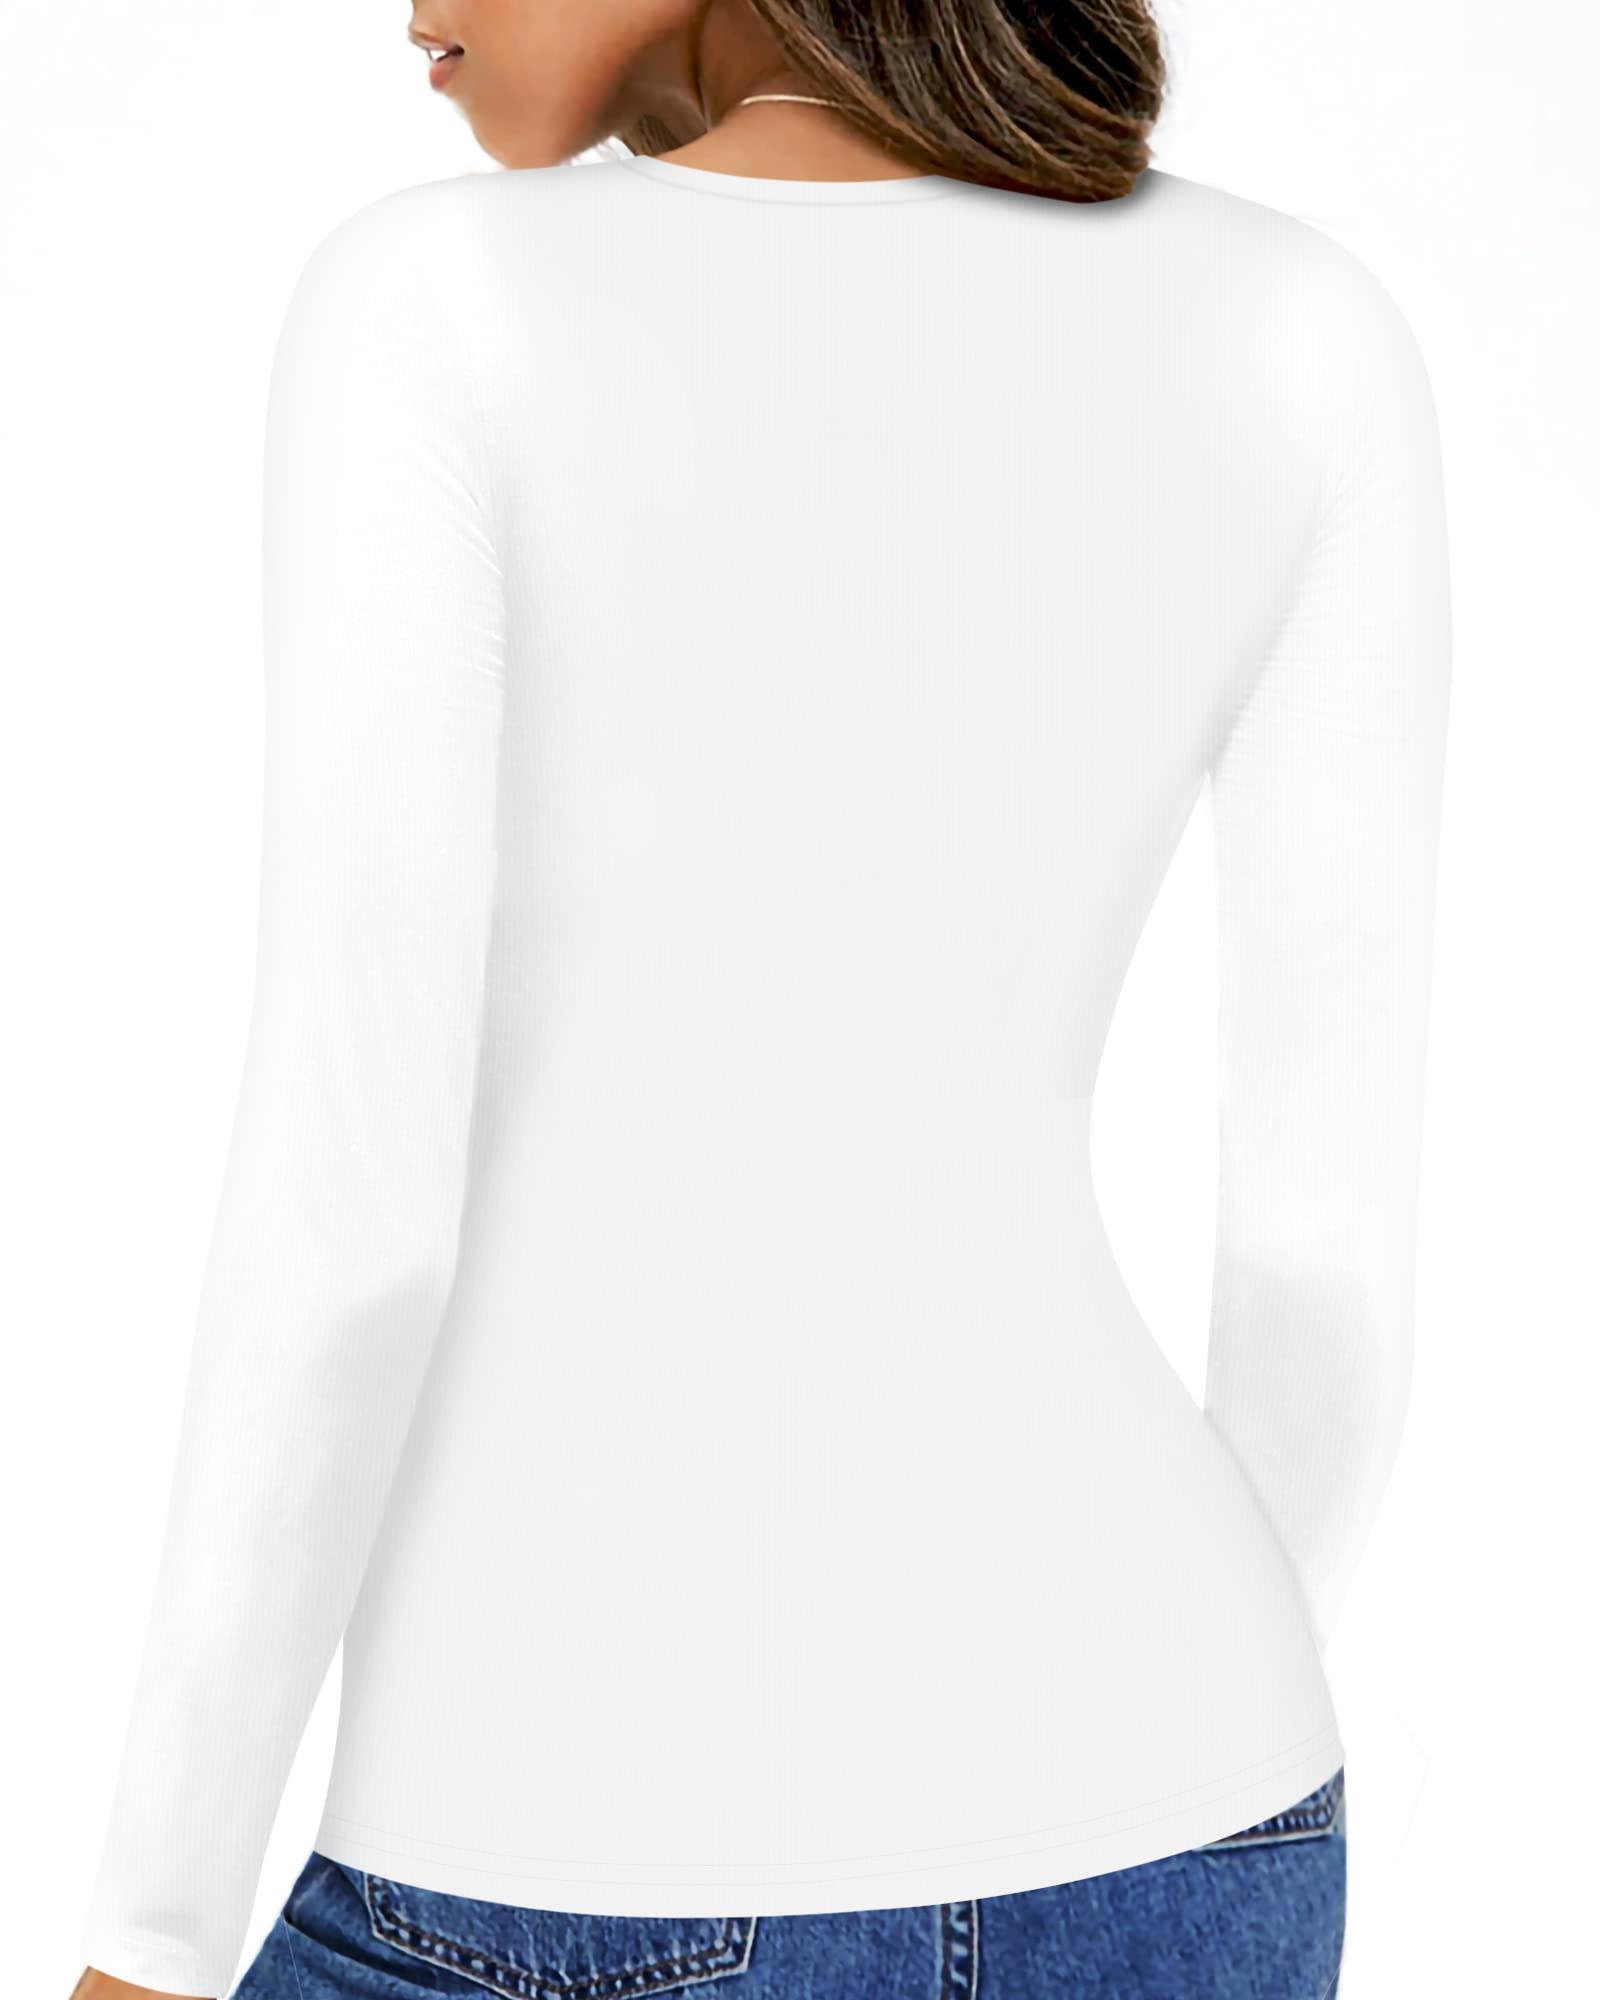 HERLOLLYCHIPS Womens Long Sleeve Tops Cut Out Front Ribbed Fitted Sexy Casual Dressy Fall Tee T-Shirts Tshirt  (White, Large) - Bona Fide Fashion